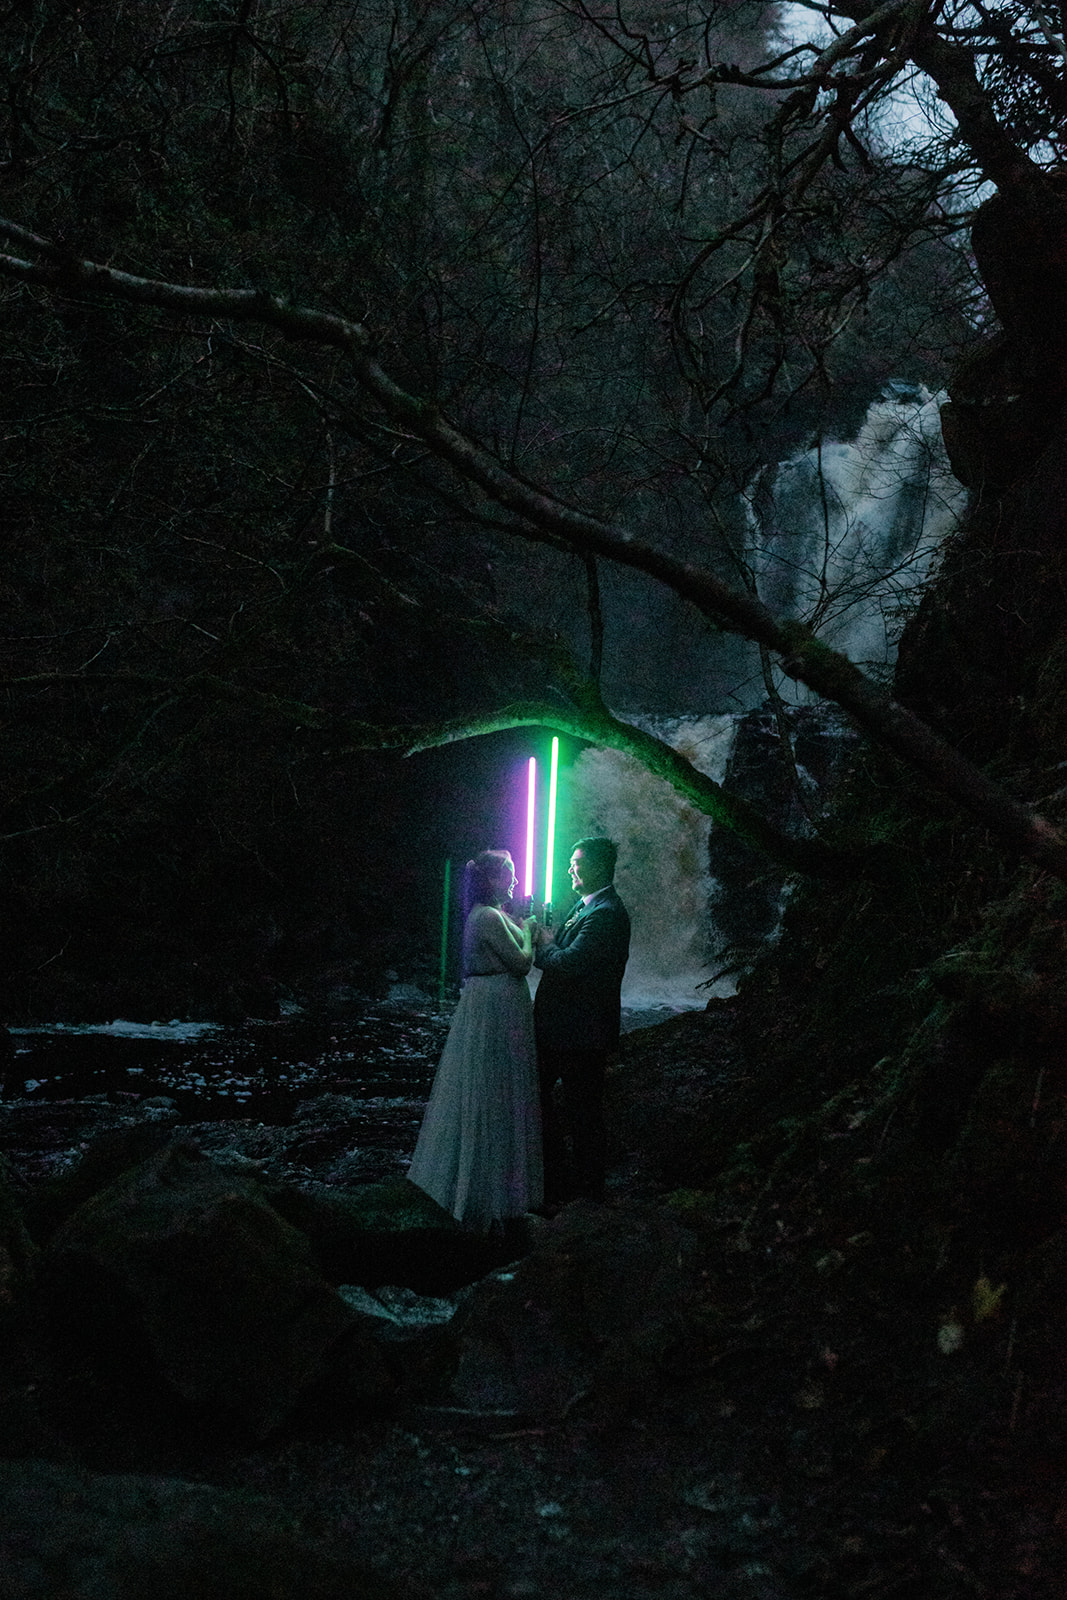 Mellie and Andrew pose for their evening Isle of Skye elopement photos while holding Star Wars light sabers as props.